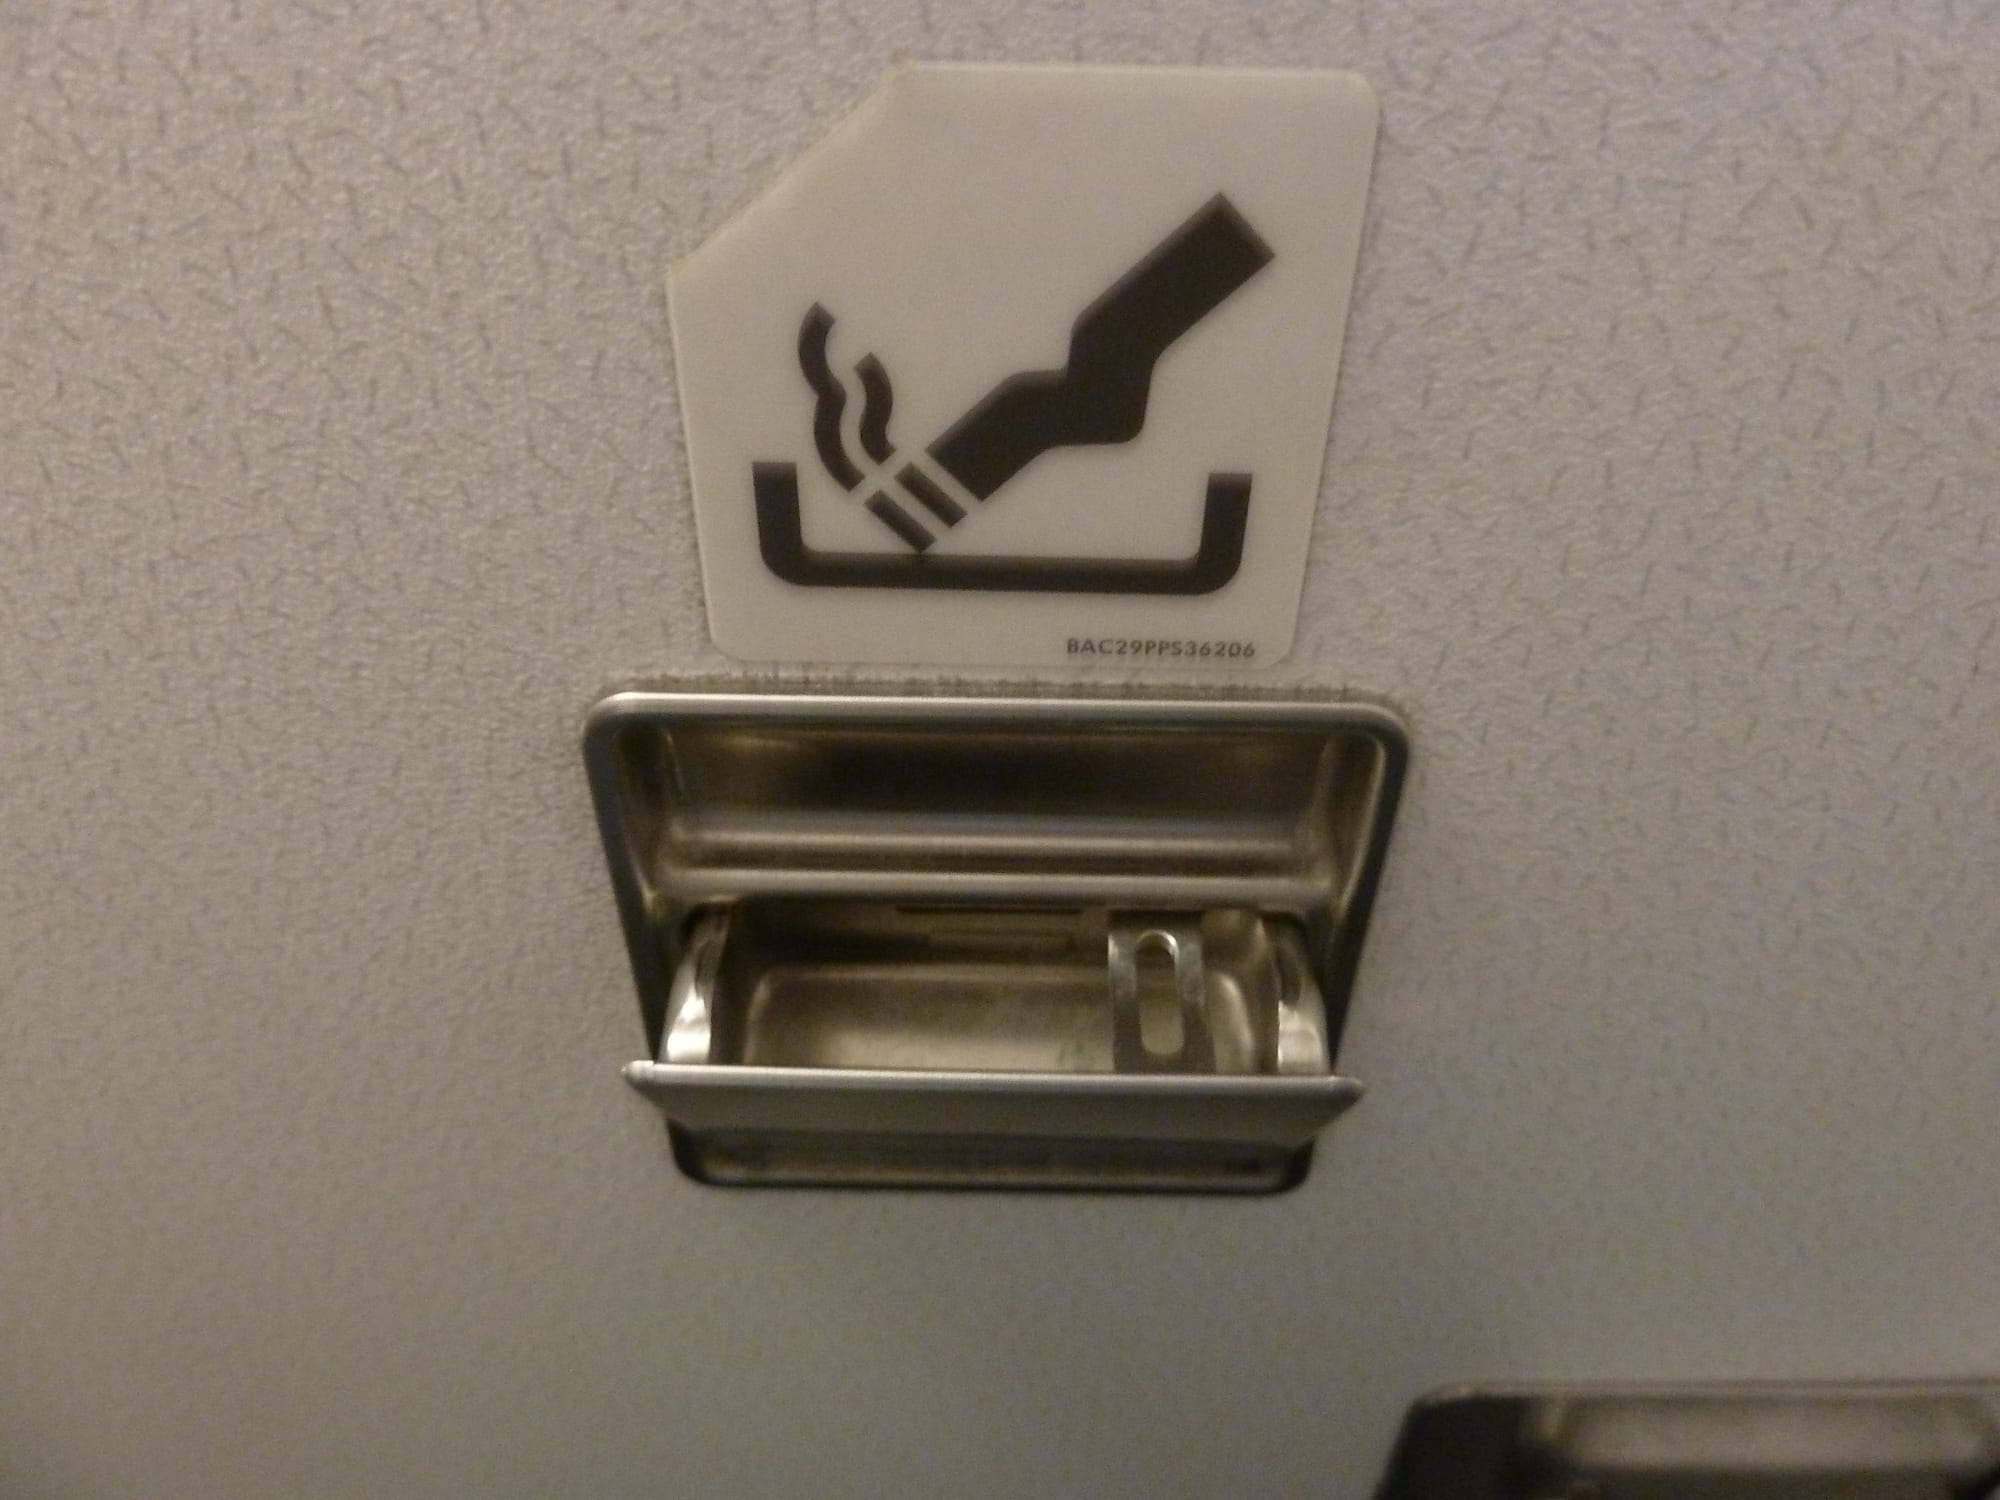 Why do Planes Still Have Ashtrays?